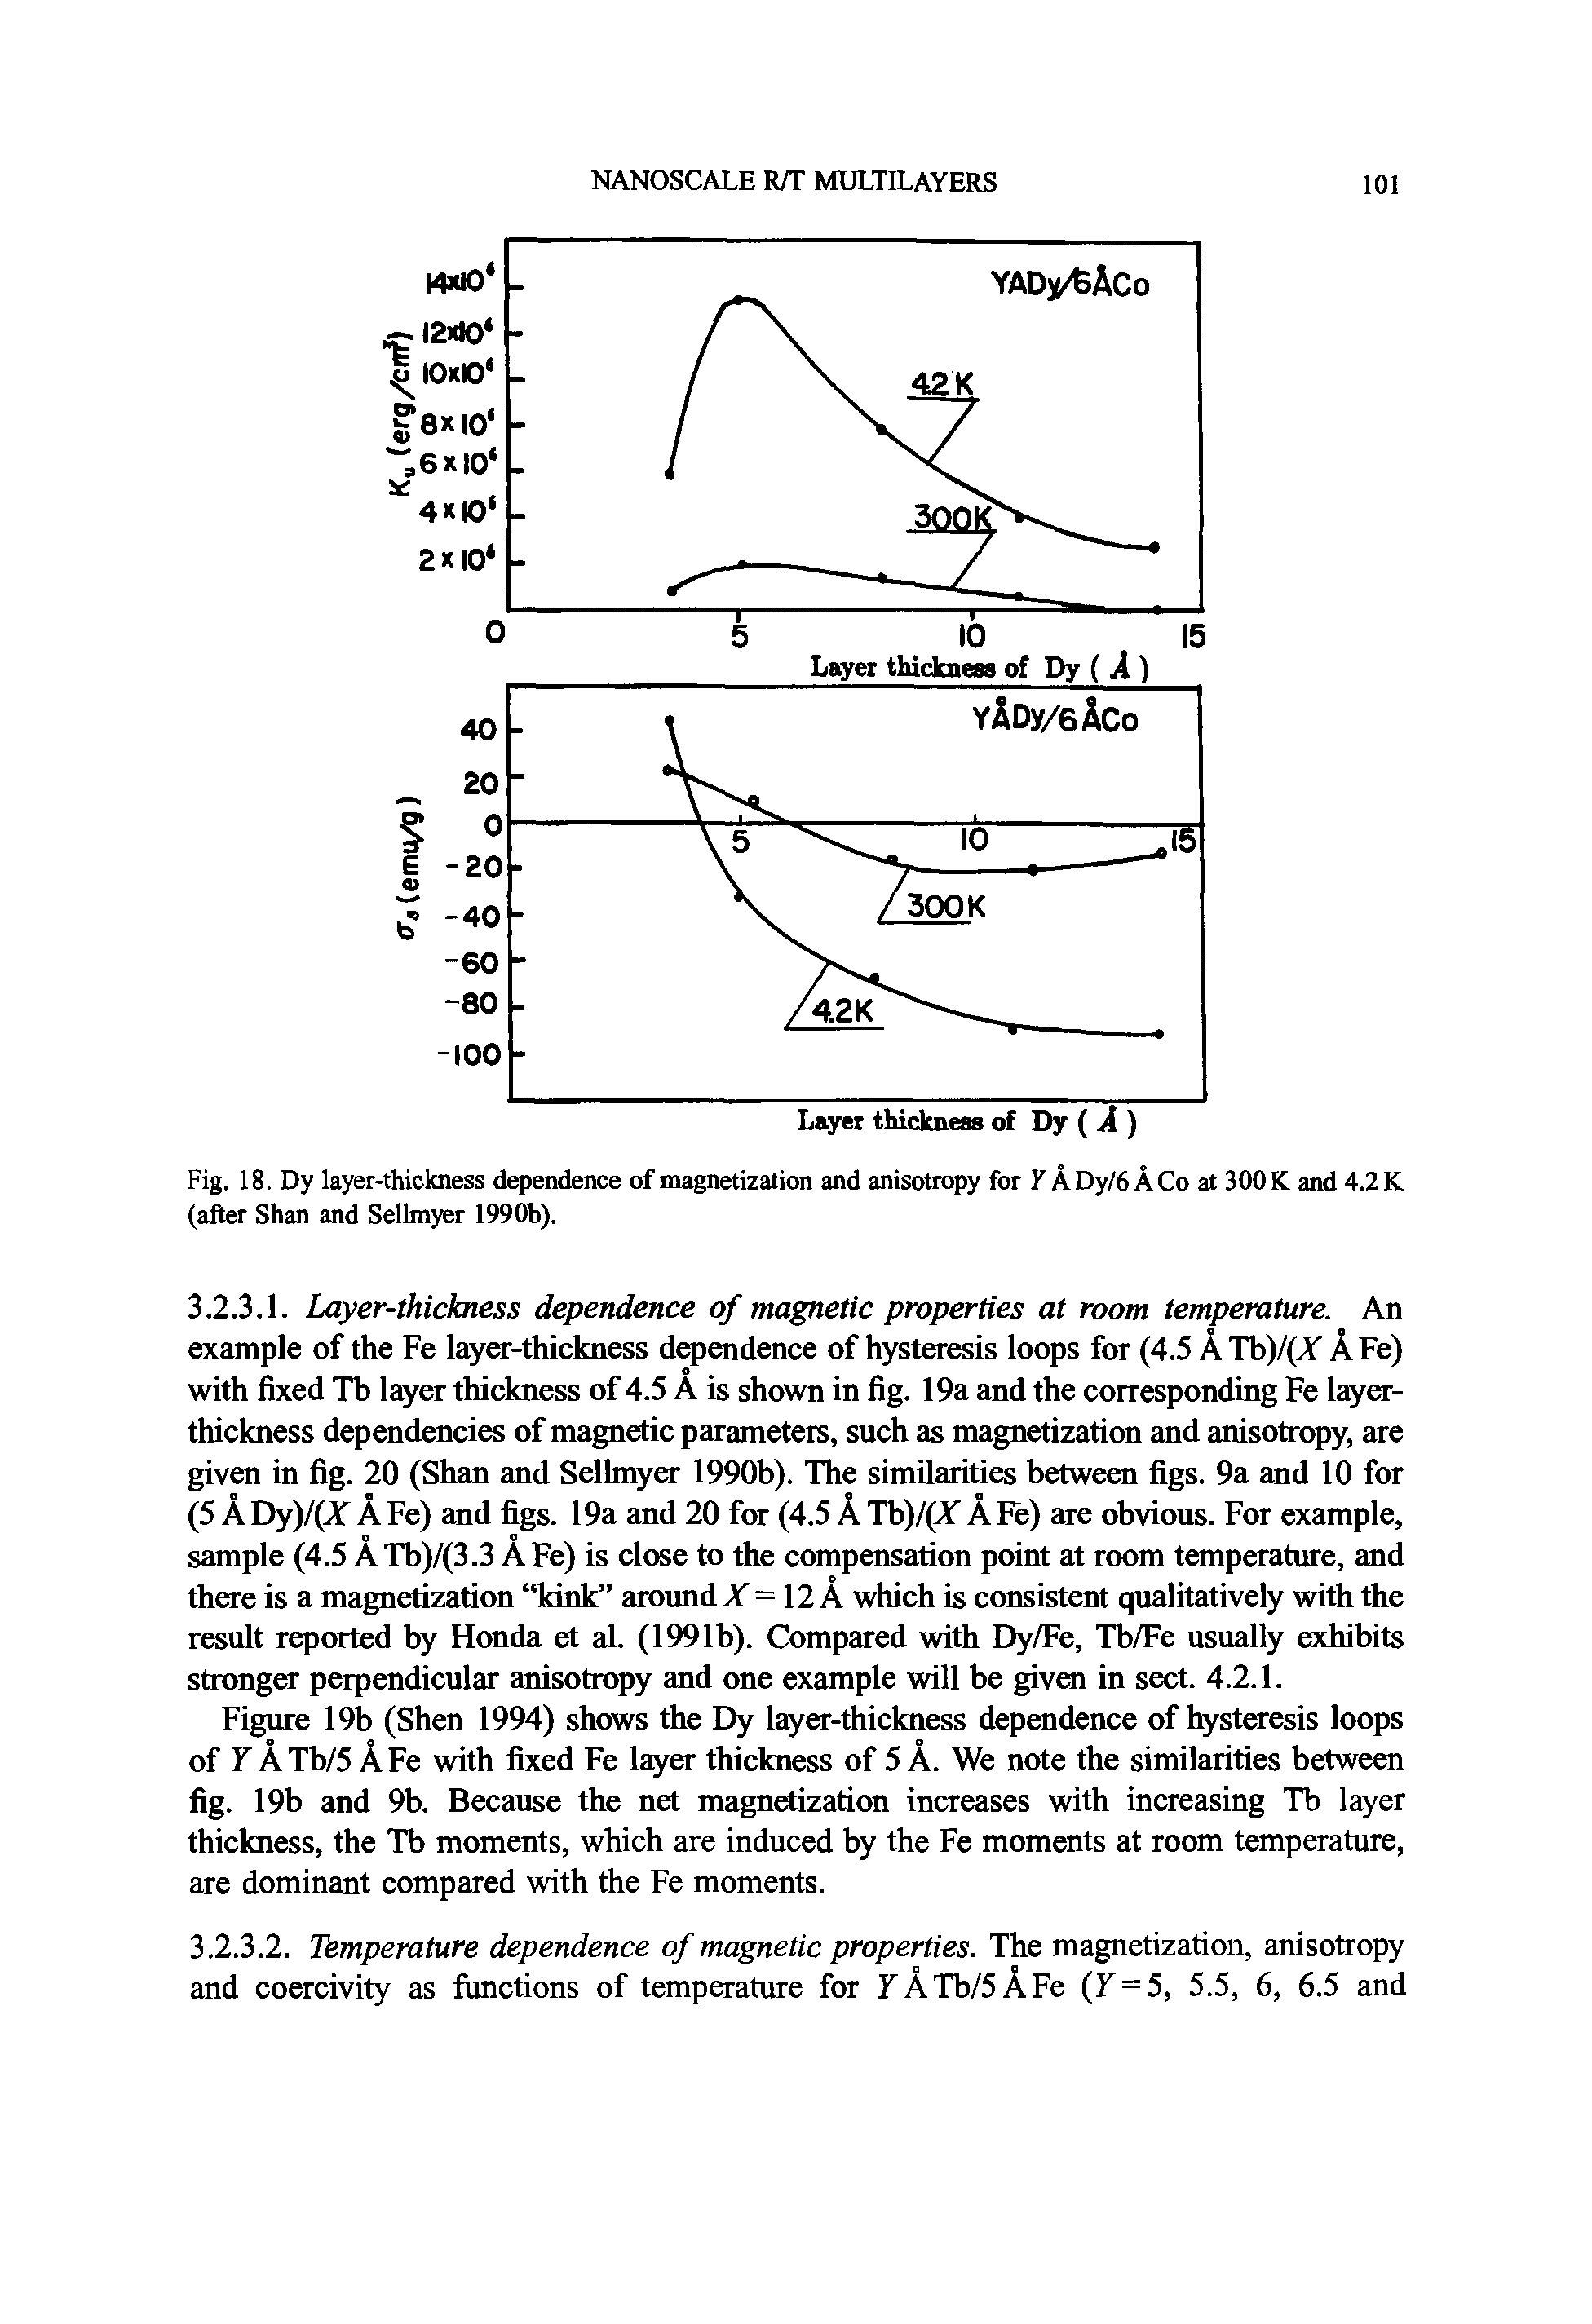 Figure 19b (Shen 1994) shows the Dy layer-thickness dependence of hysteresis loops of Y Axb/5 AFe with fixed Fe layer thickness of 5 A. We note the similarities between fig. 19b and 9b. Because the net magnetization increases with increasing Tb layer thickness, the Tb moments, which are induced by the Fe moments at room temperature, are dominant compared with the Fe moments.